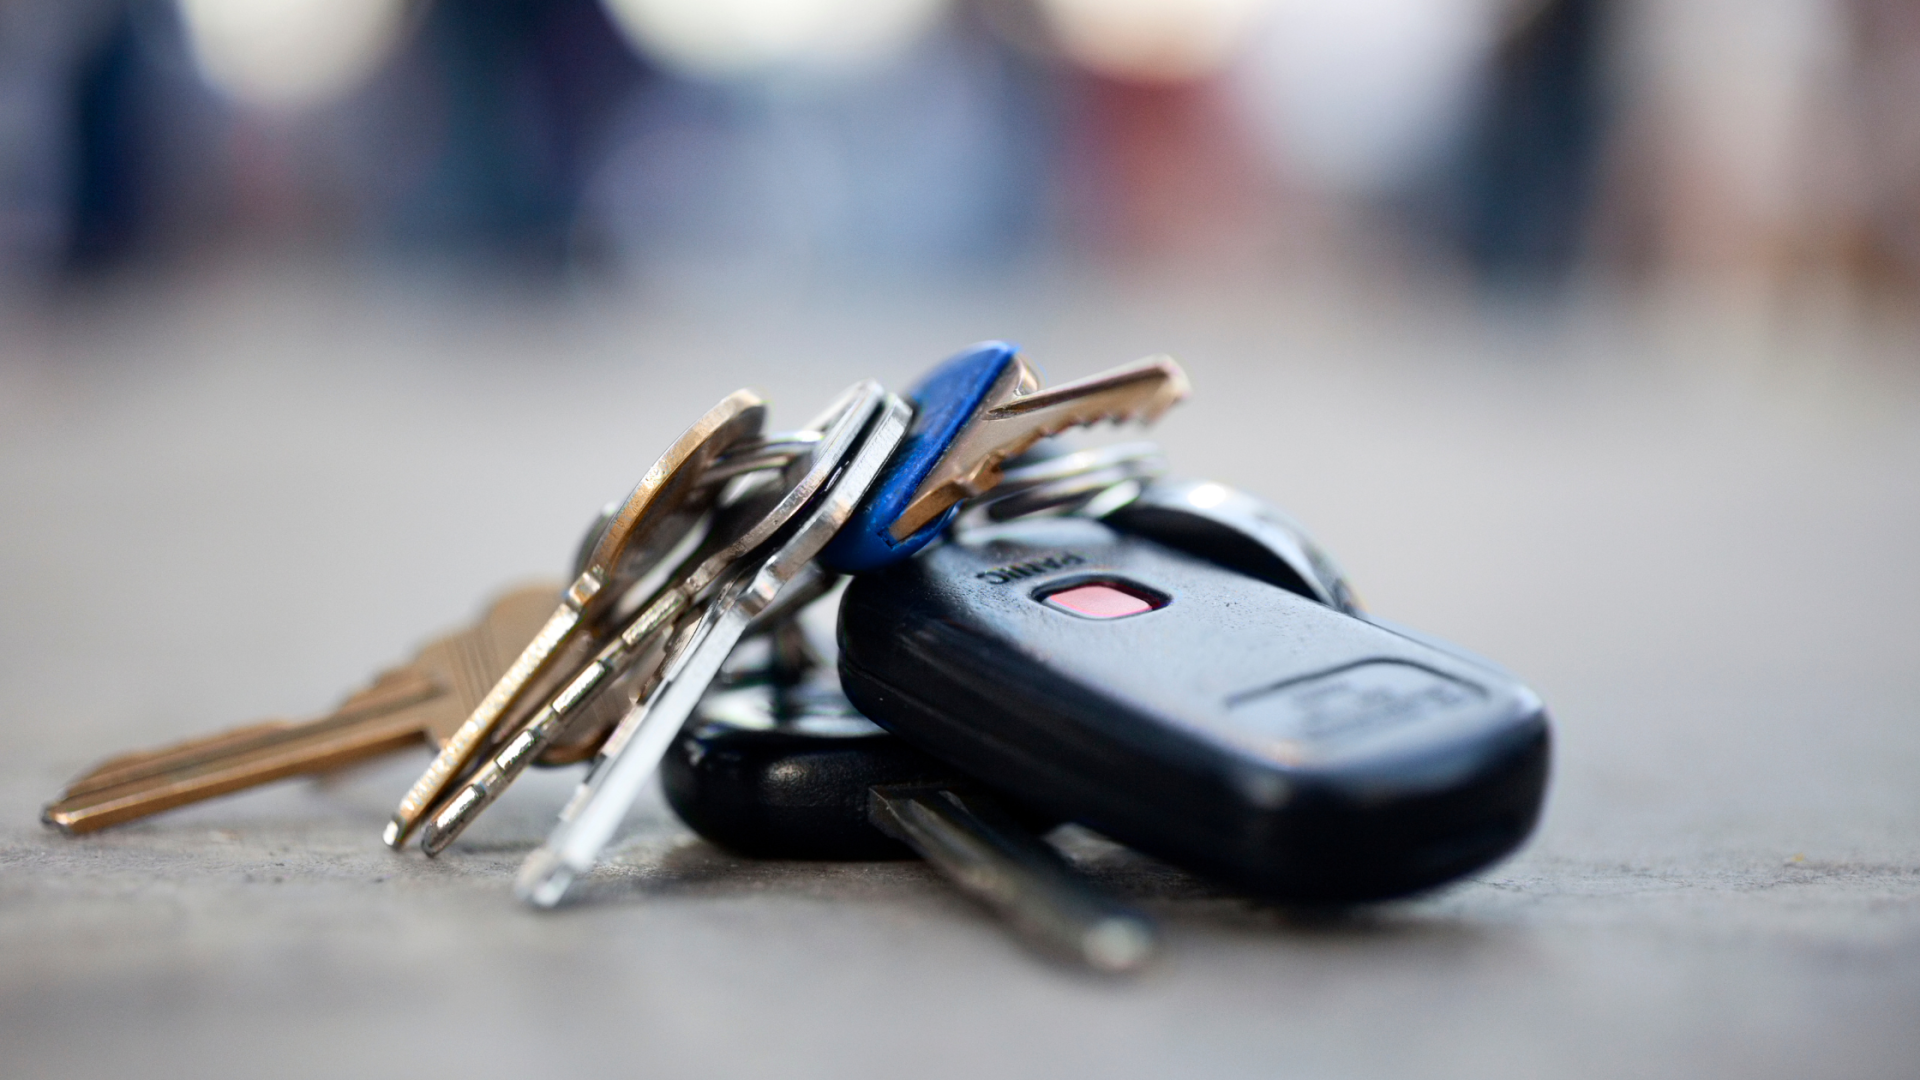 lost your keys heres what to do next advice from professional locksmiths - The LockSmith Co.